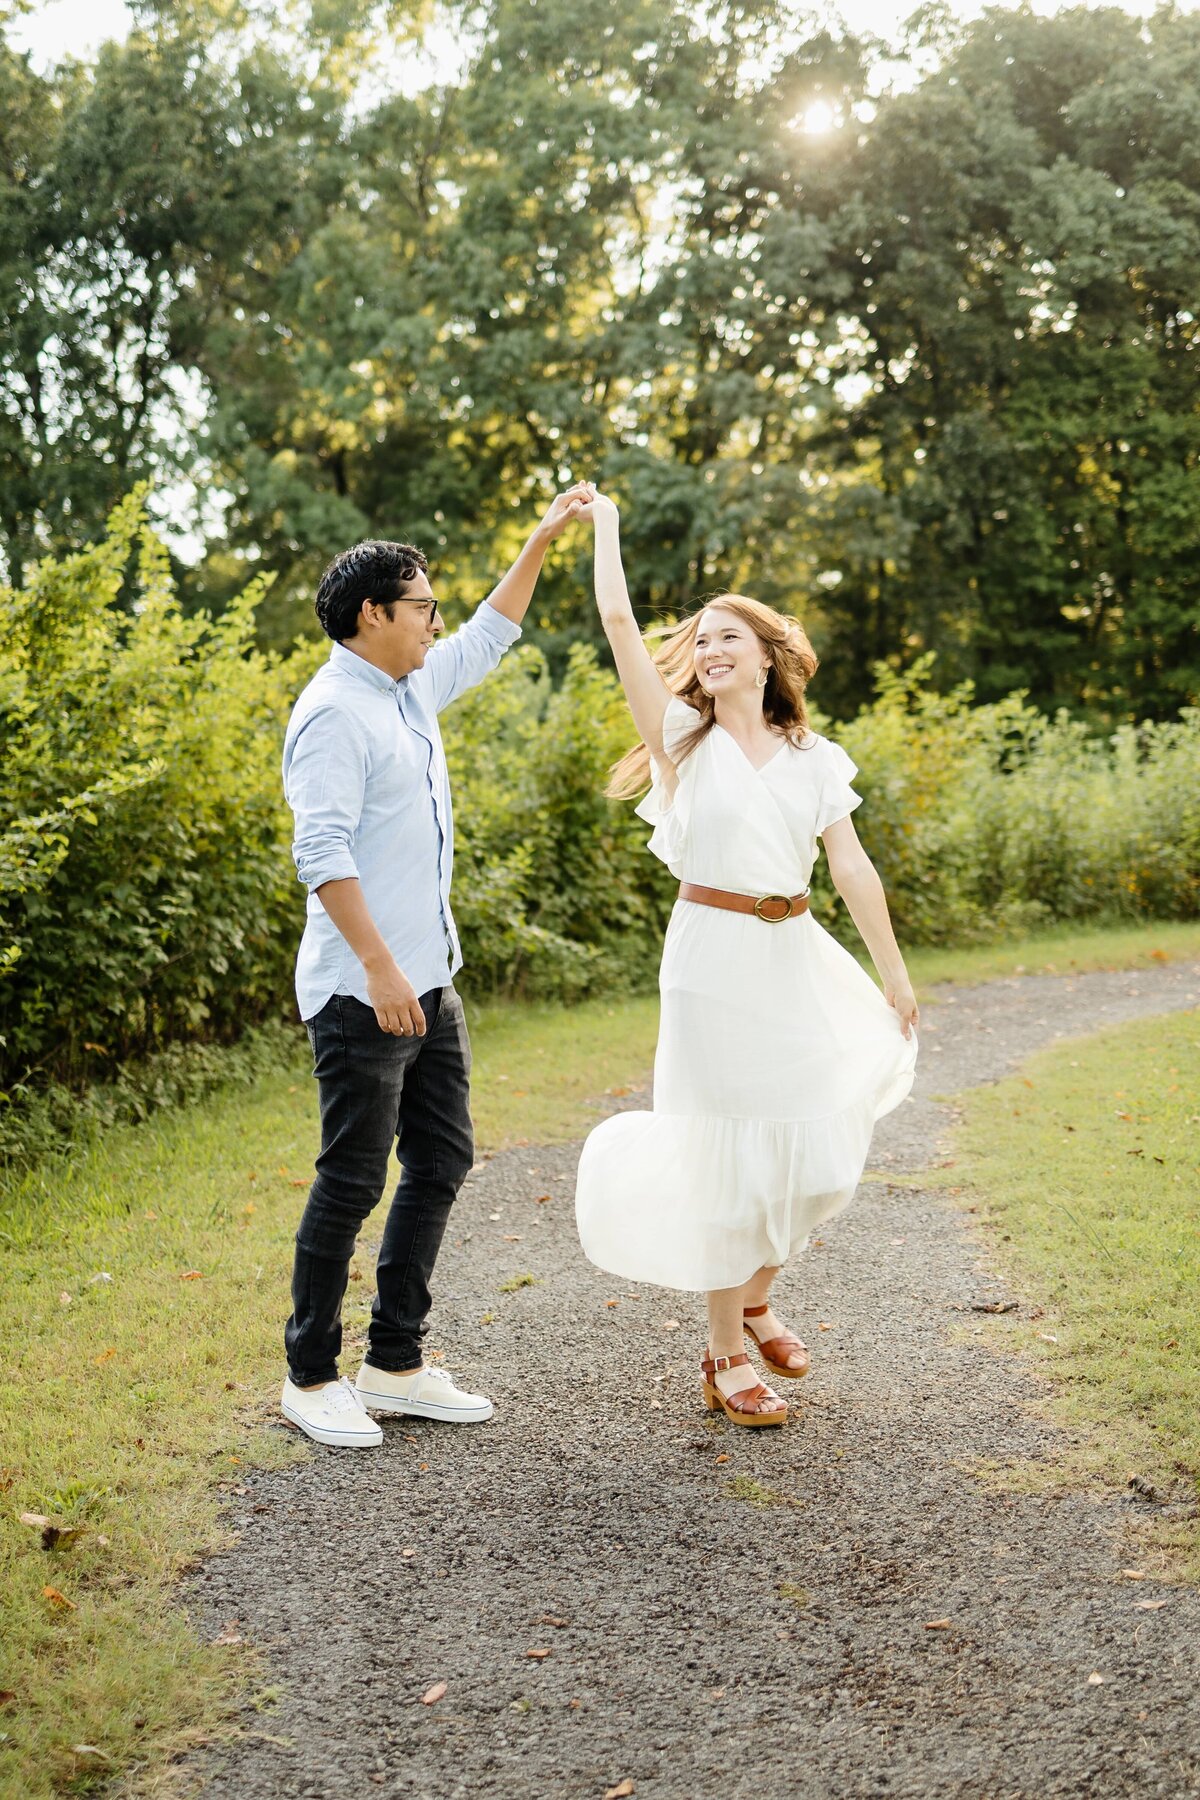 Outdoor Engagement Session in Rural Tennessee